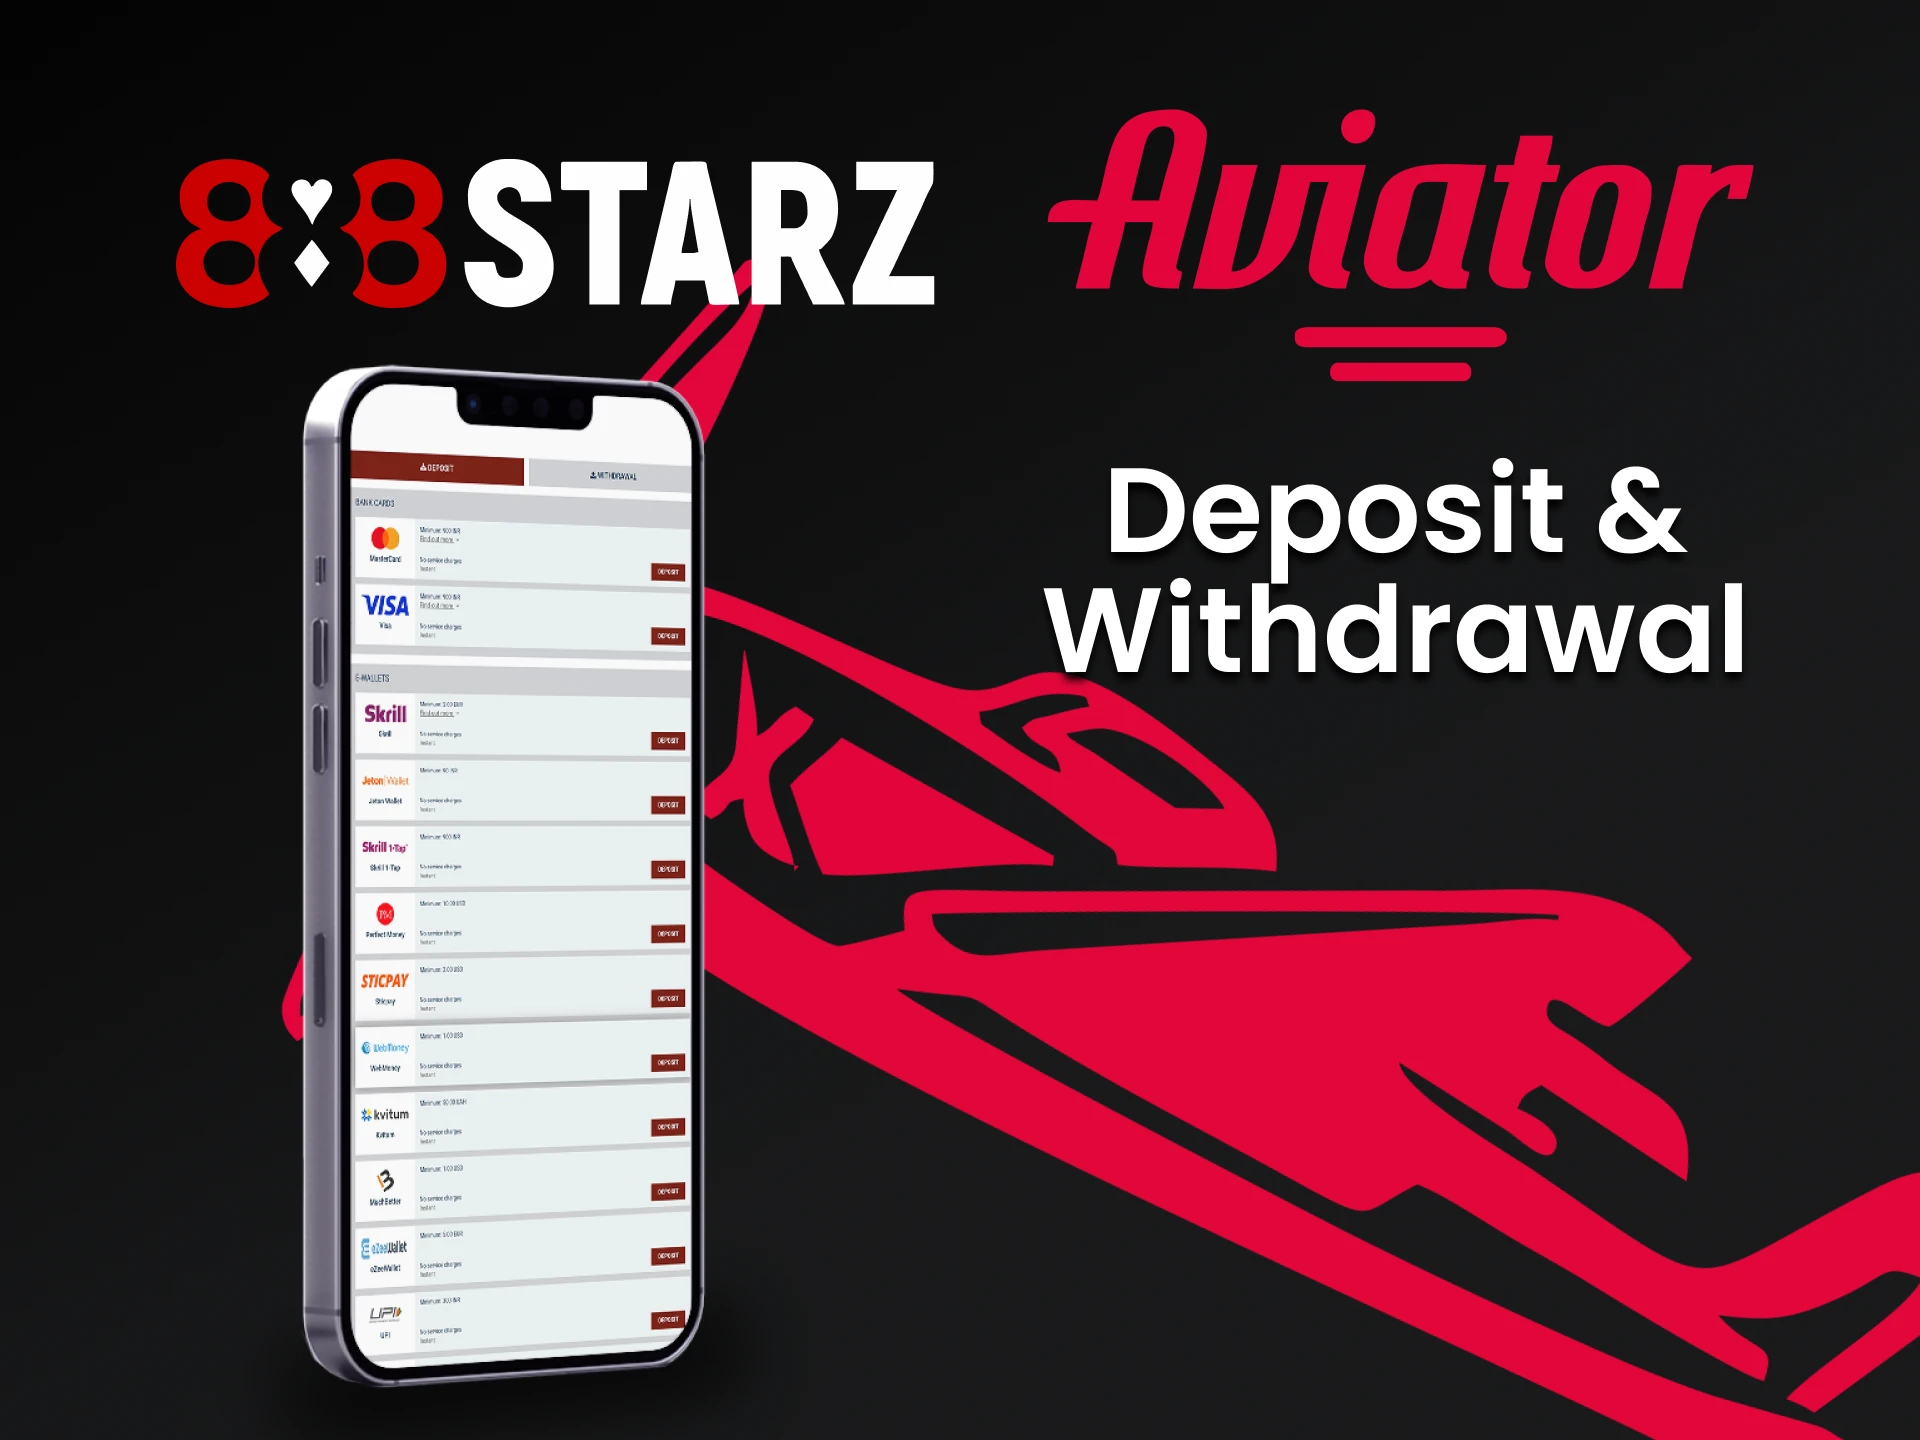 Choose the appropriate transaction method from 888starz.